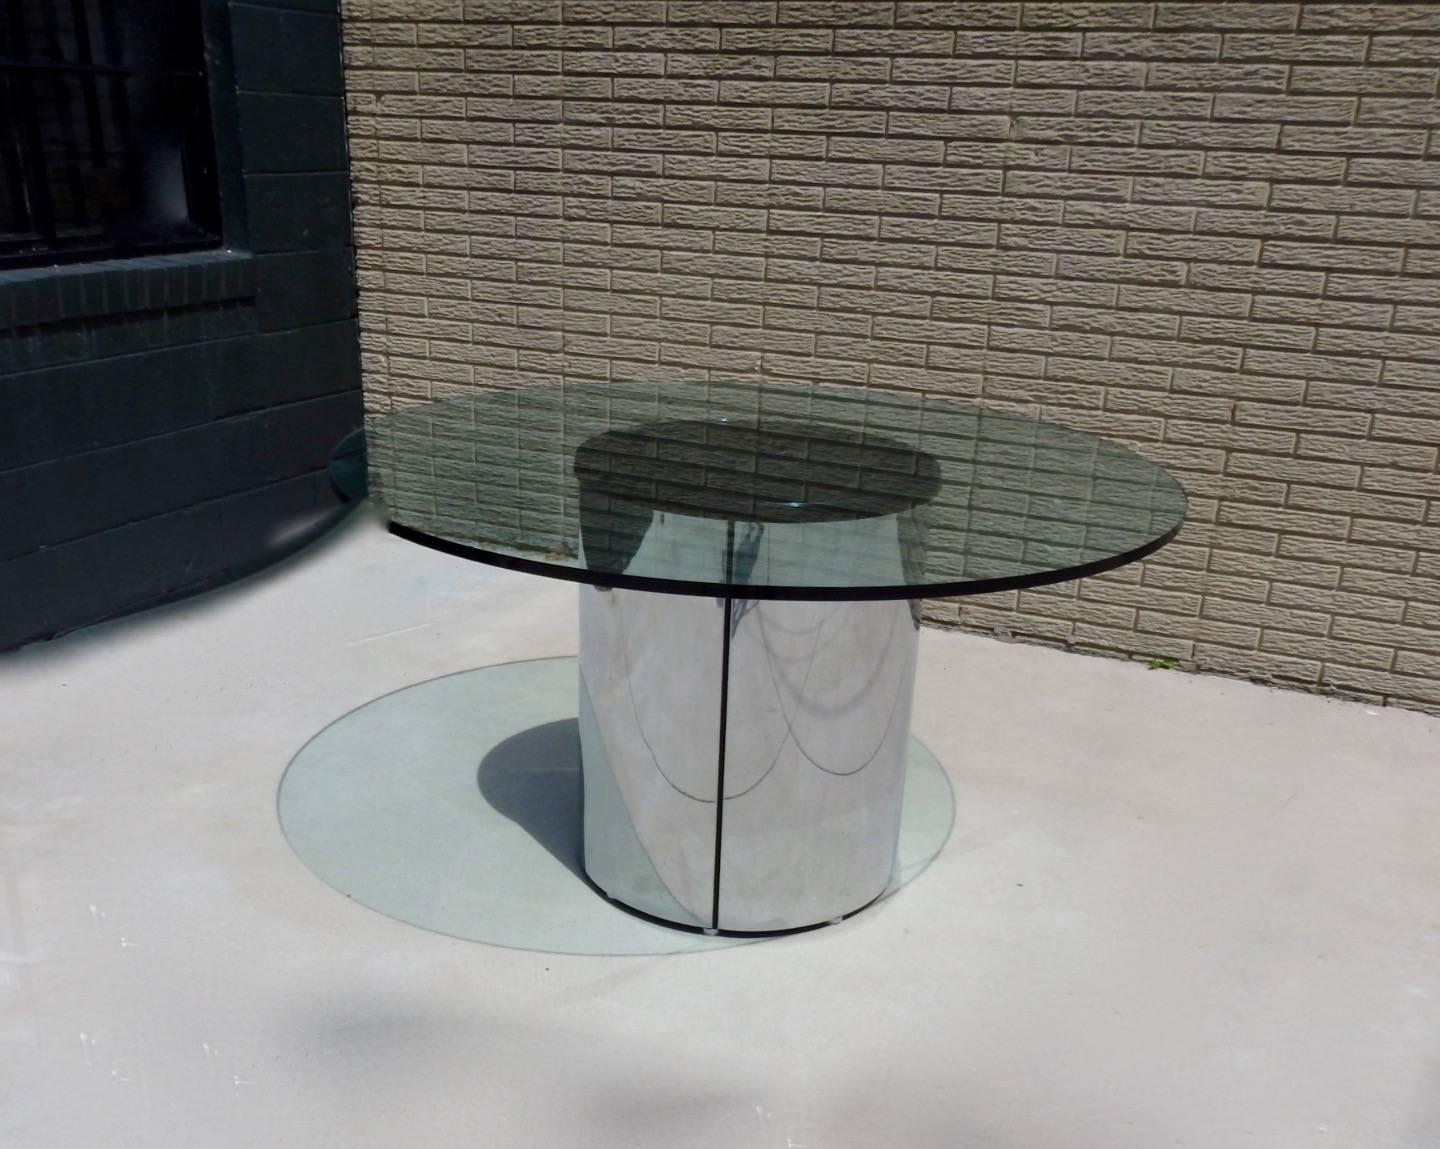 Very clean one inch thick glass top on clean polished stainless steel cylinder base. Attributed to Pace or Brueton.